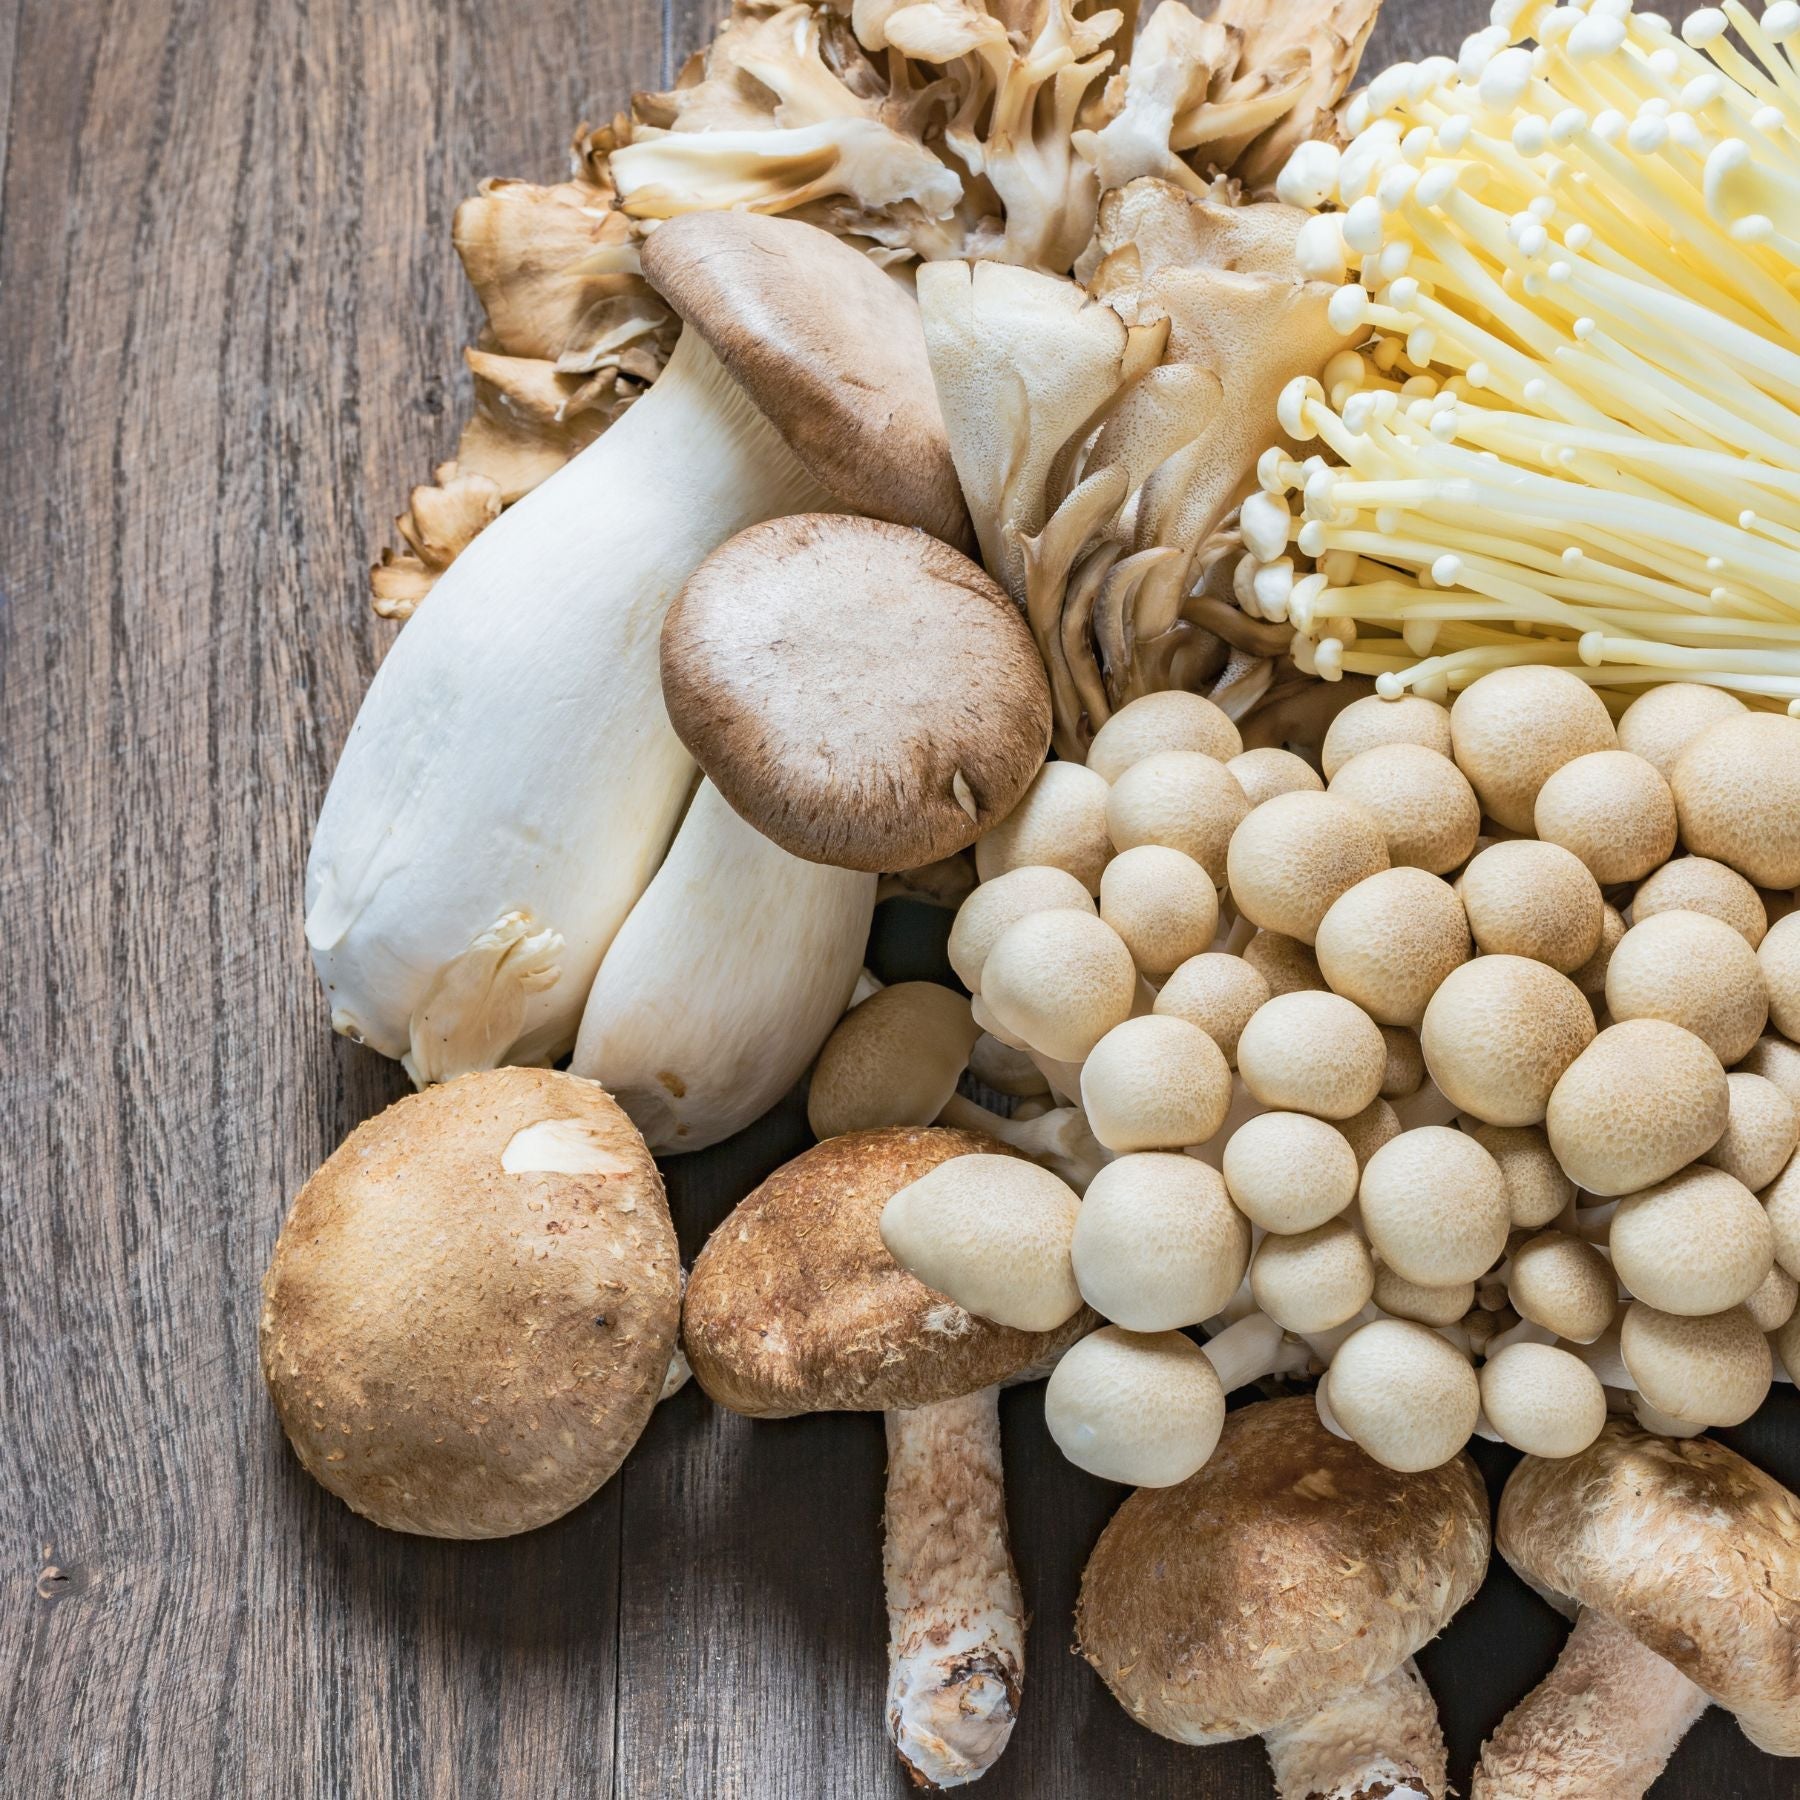 Why functional mushrooms are good for health - Nummies